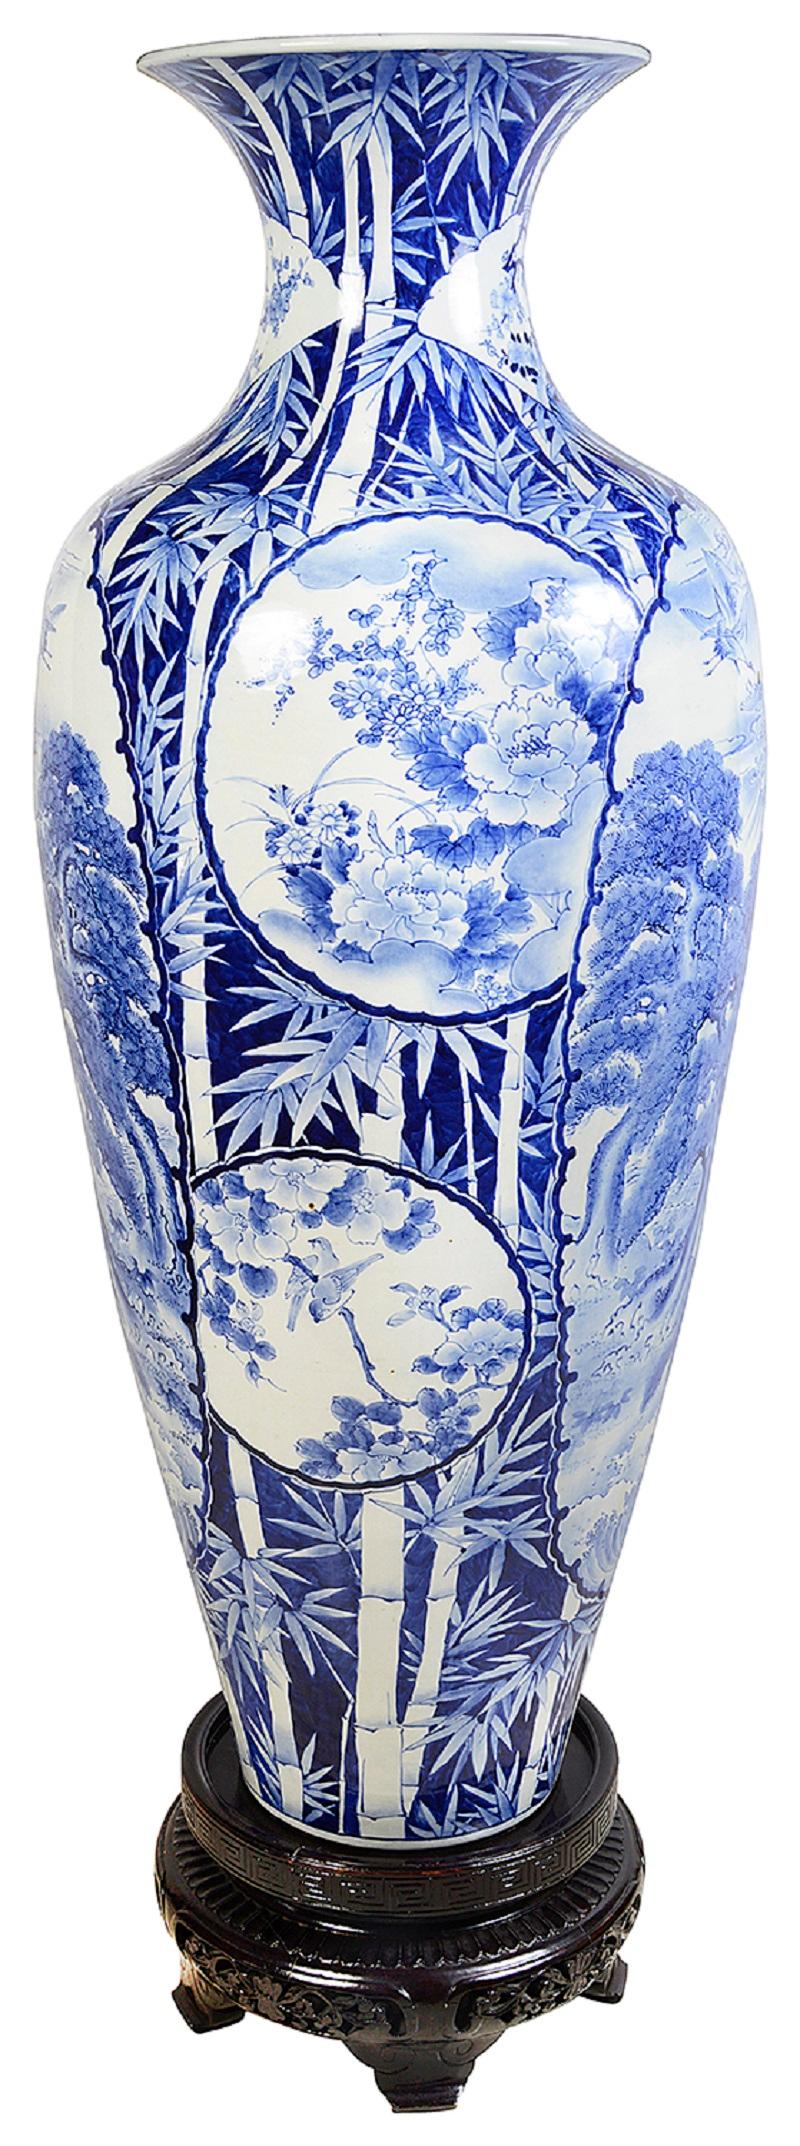 A large and impressive late 19th Century (Meiji period 1868-1912) Japanese blue and white vase on stand.
Having wonderful hand painted bamboo to the ground, with inset panels depicting mountainous scenes, blossom trees and flying cranes. mounted on